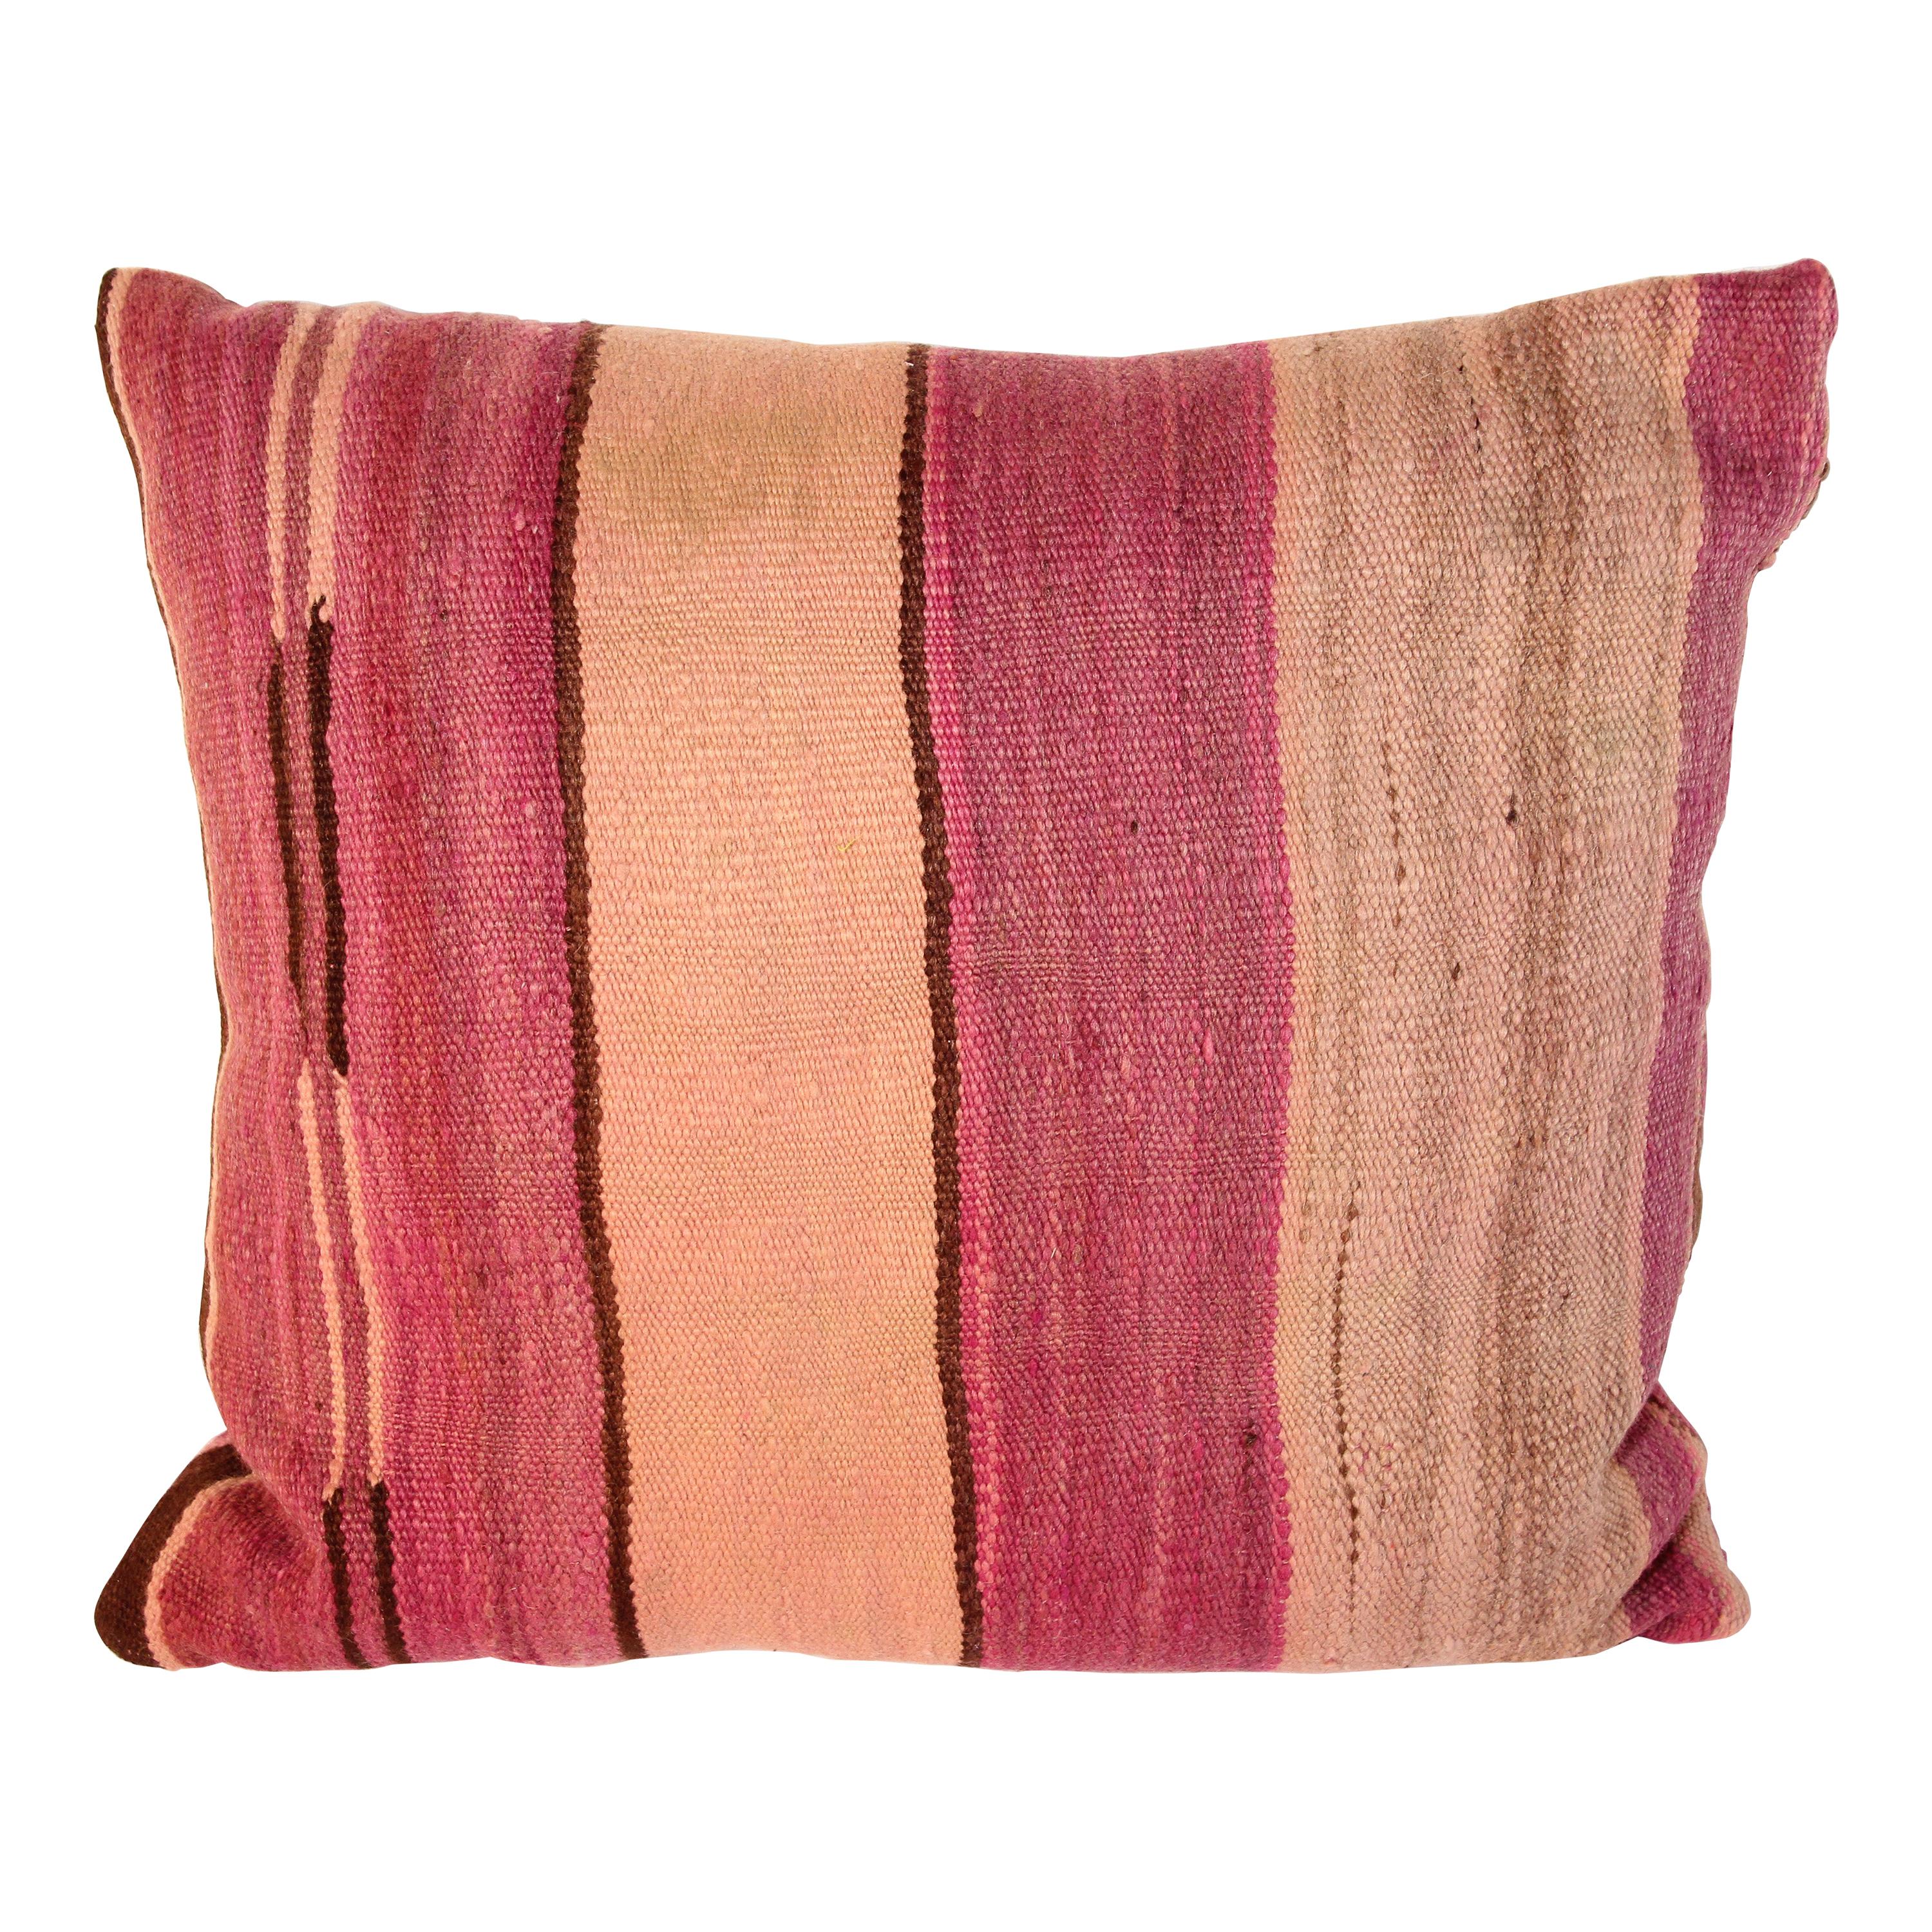 Moroccan Tribal Lumbar Pillow Cut from a Vintage Beber Stripes Rug